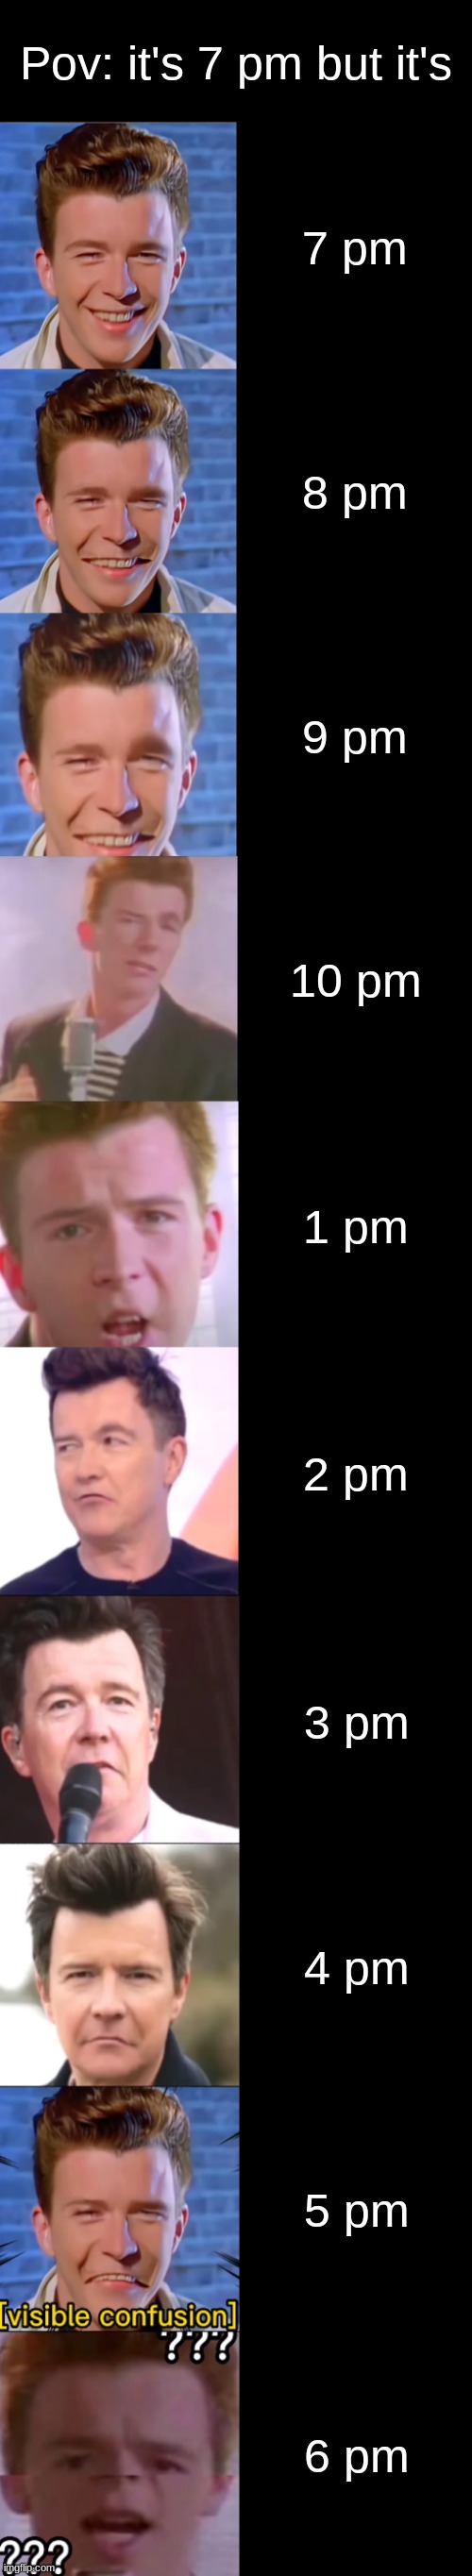 Rick Astley Becoming Confused | Pov: it's 7 pm but it's; 7 pm; 8 pm; 9 pm; 10 pm; 1 pm; 2 pm; 3 pm; 4 pm; 5 pm; 6 pm | image tagged in rick astley becoming confused | made w/ Imgflip meme maker